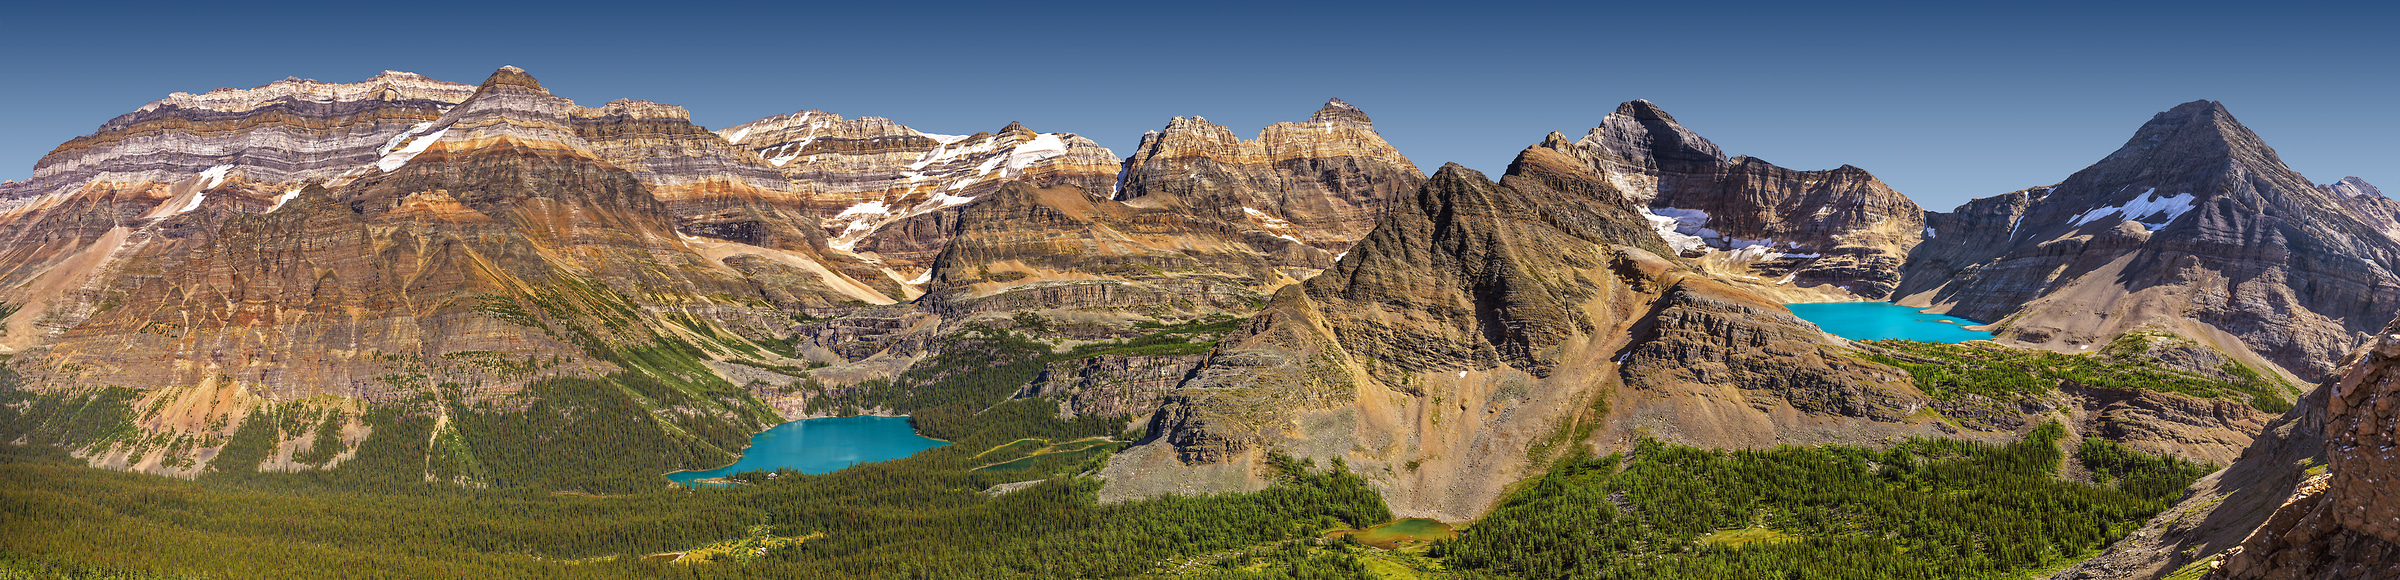 426 megapixels! A very high resolution, large-format VAST photo print of mountains and lakes; fine art landscape photo created by Chris Collacott in Yoho National Park, British Columbia, Canada.